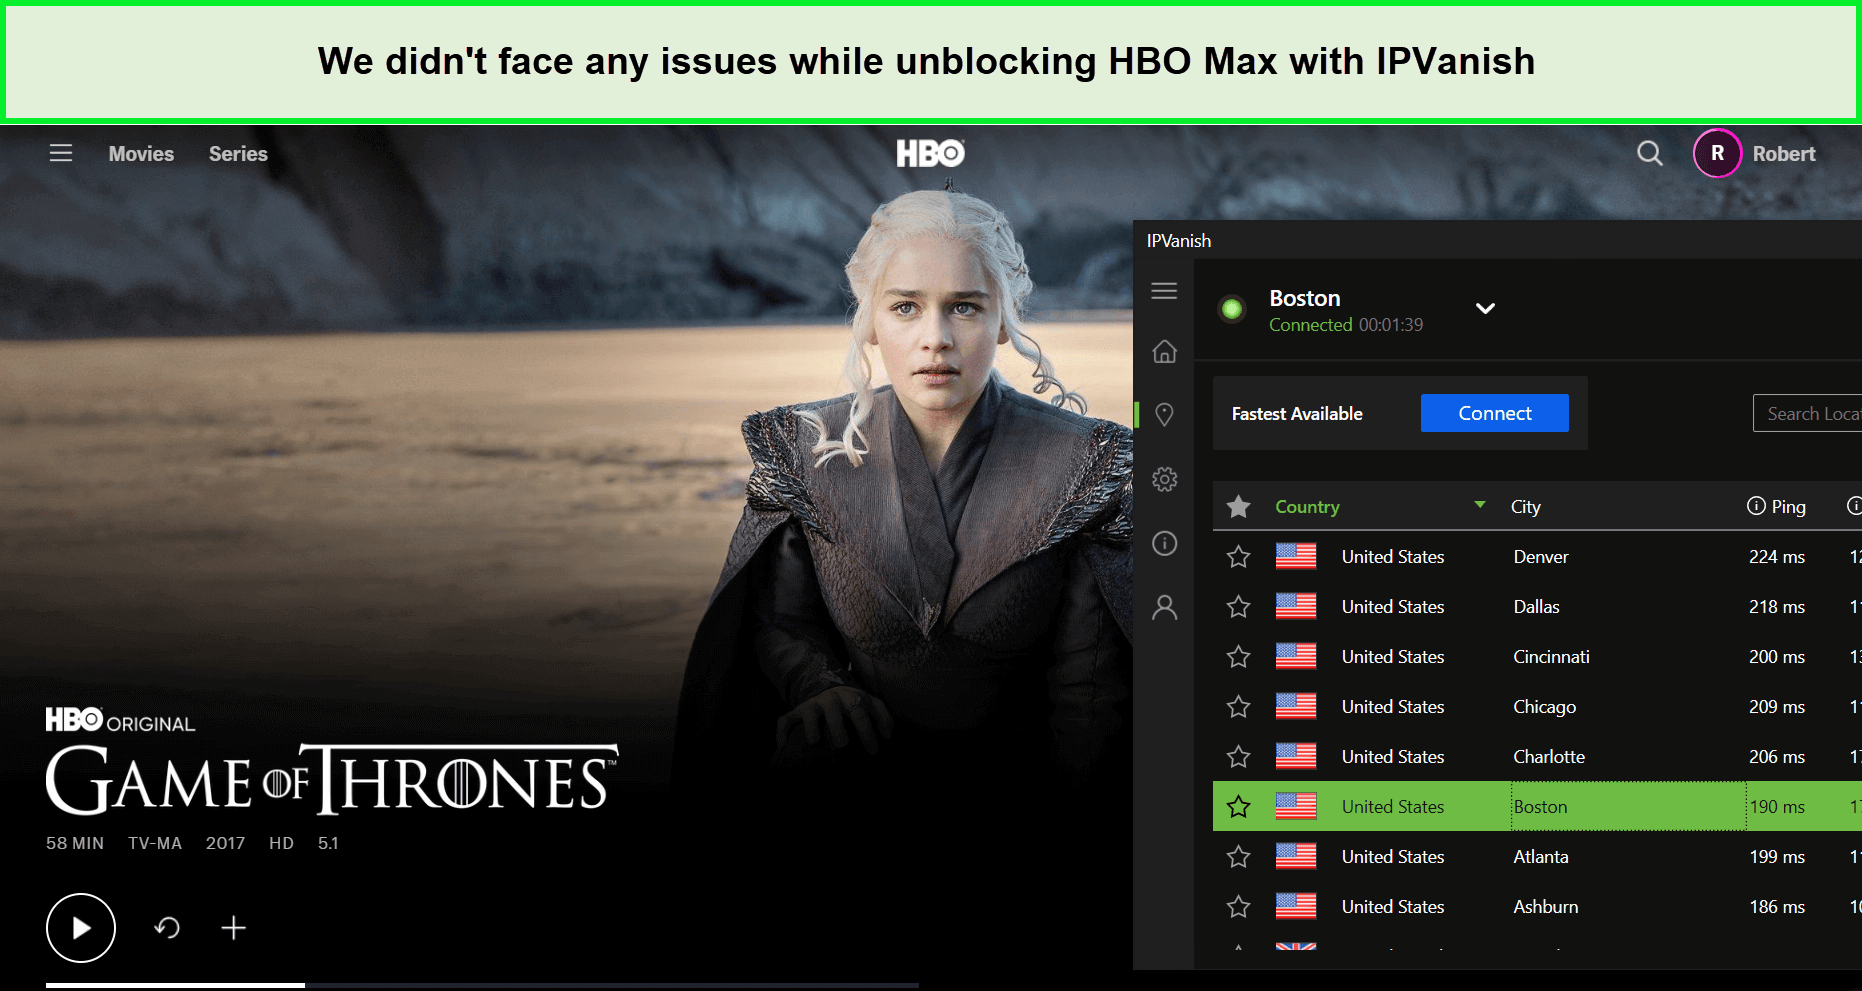 ipvanish-unblocked-hbo-max-with-us-server-For Indian Users